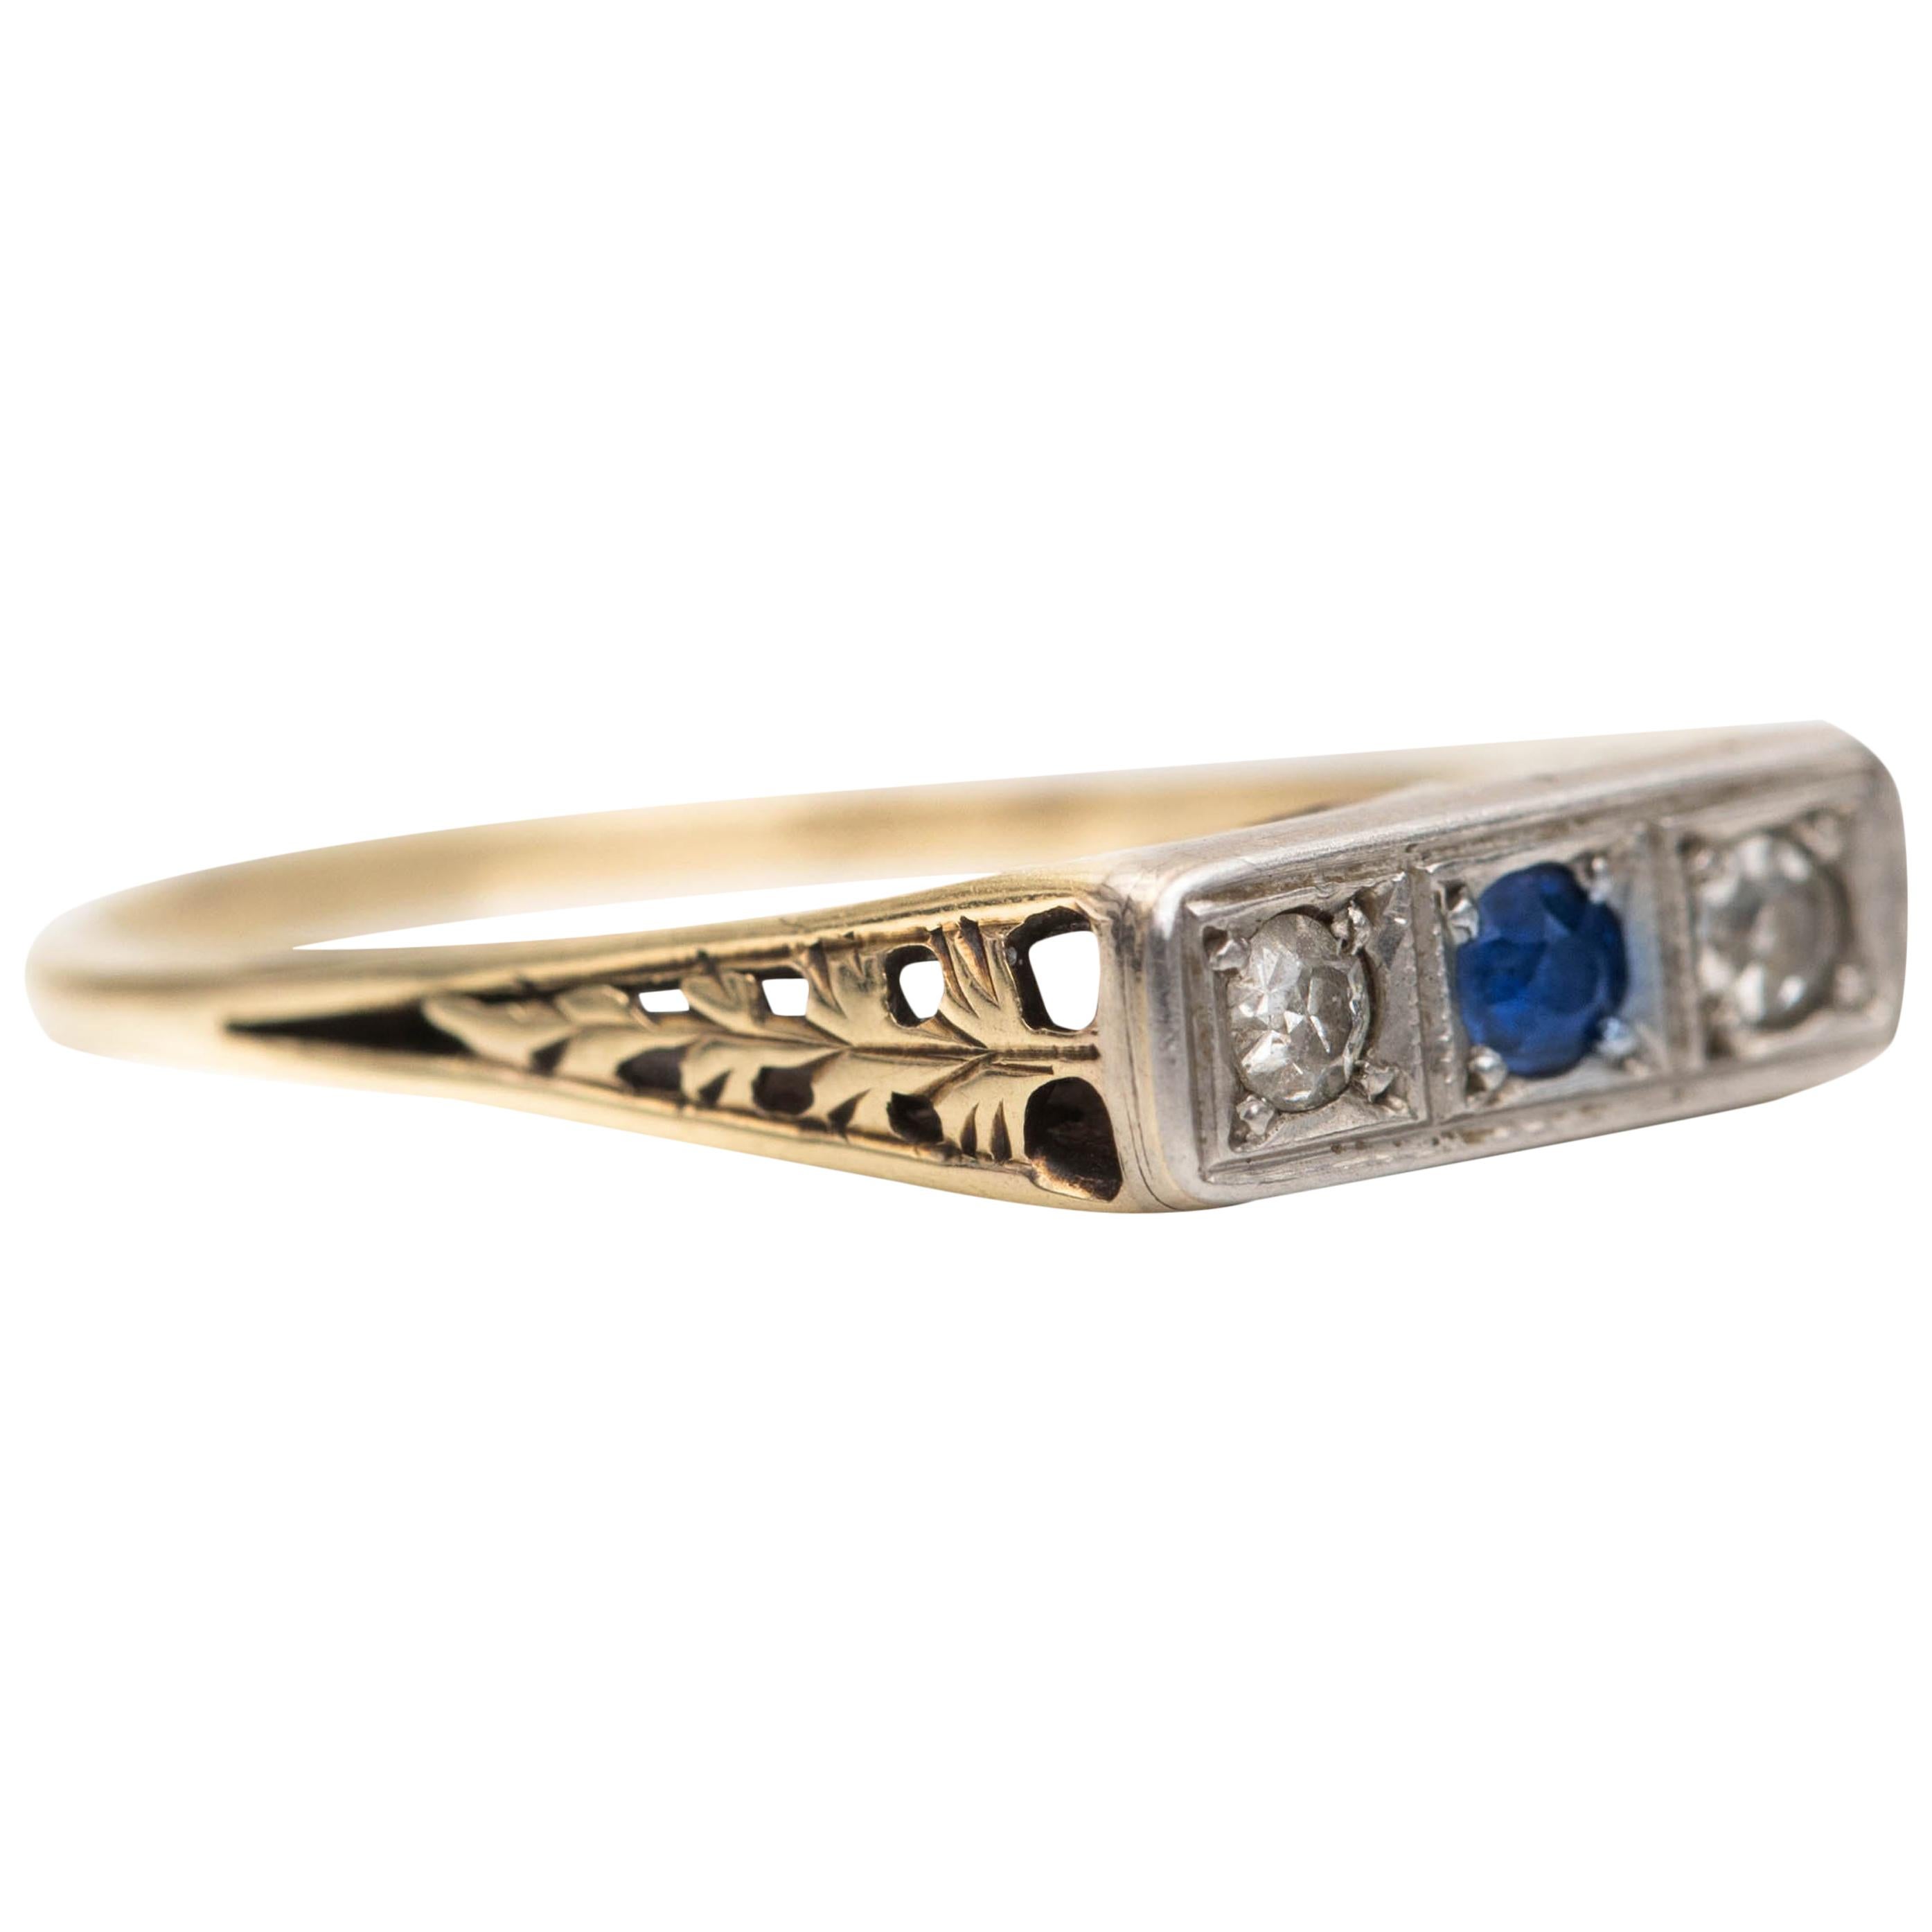 1920 Art Deco Sapphire and Diamond Two-Tone Ring